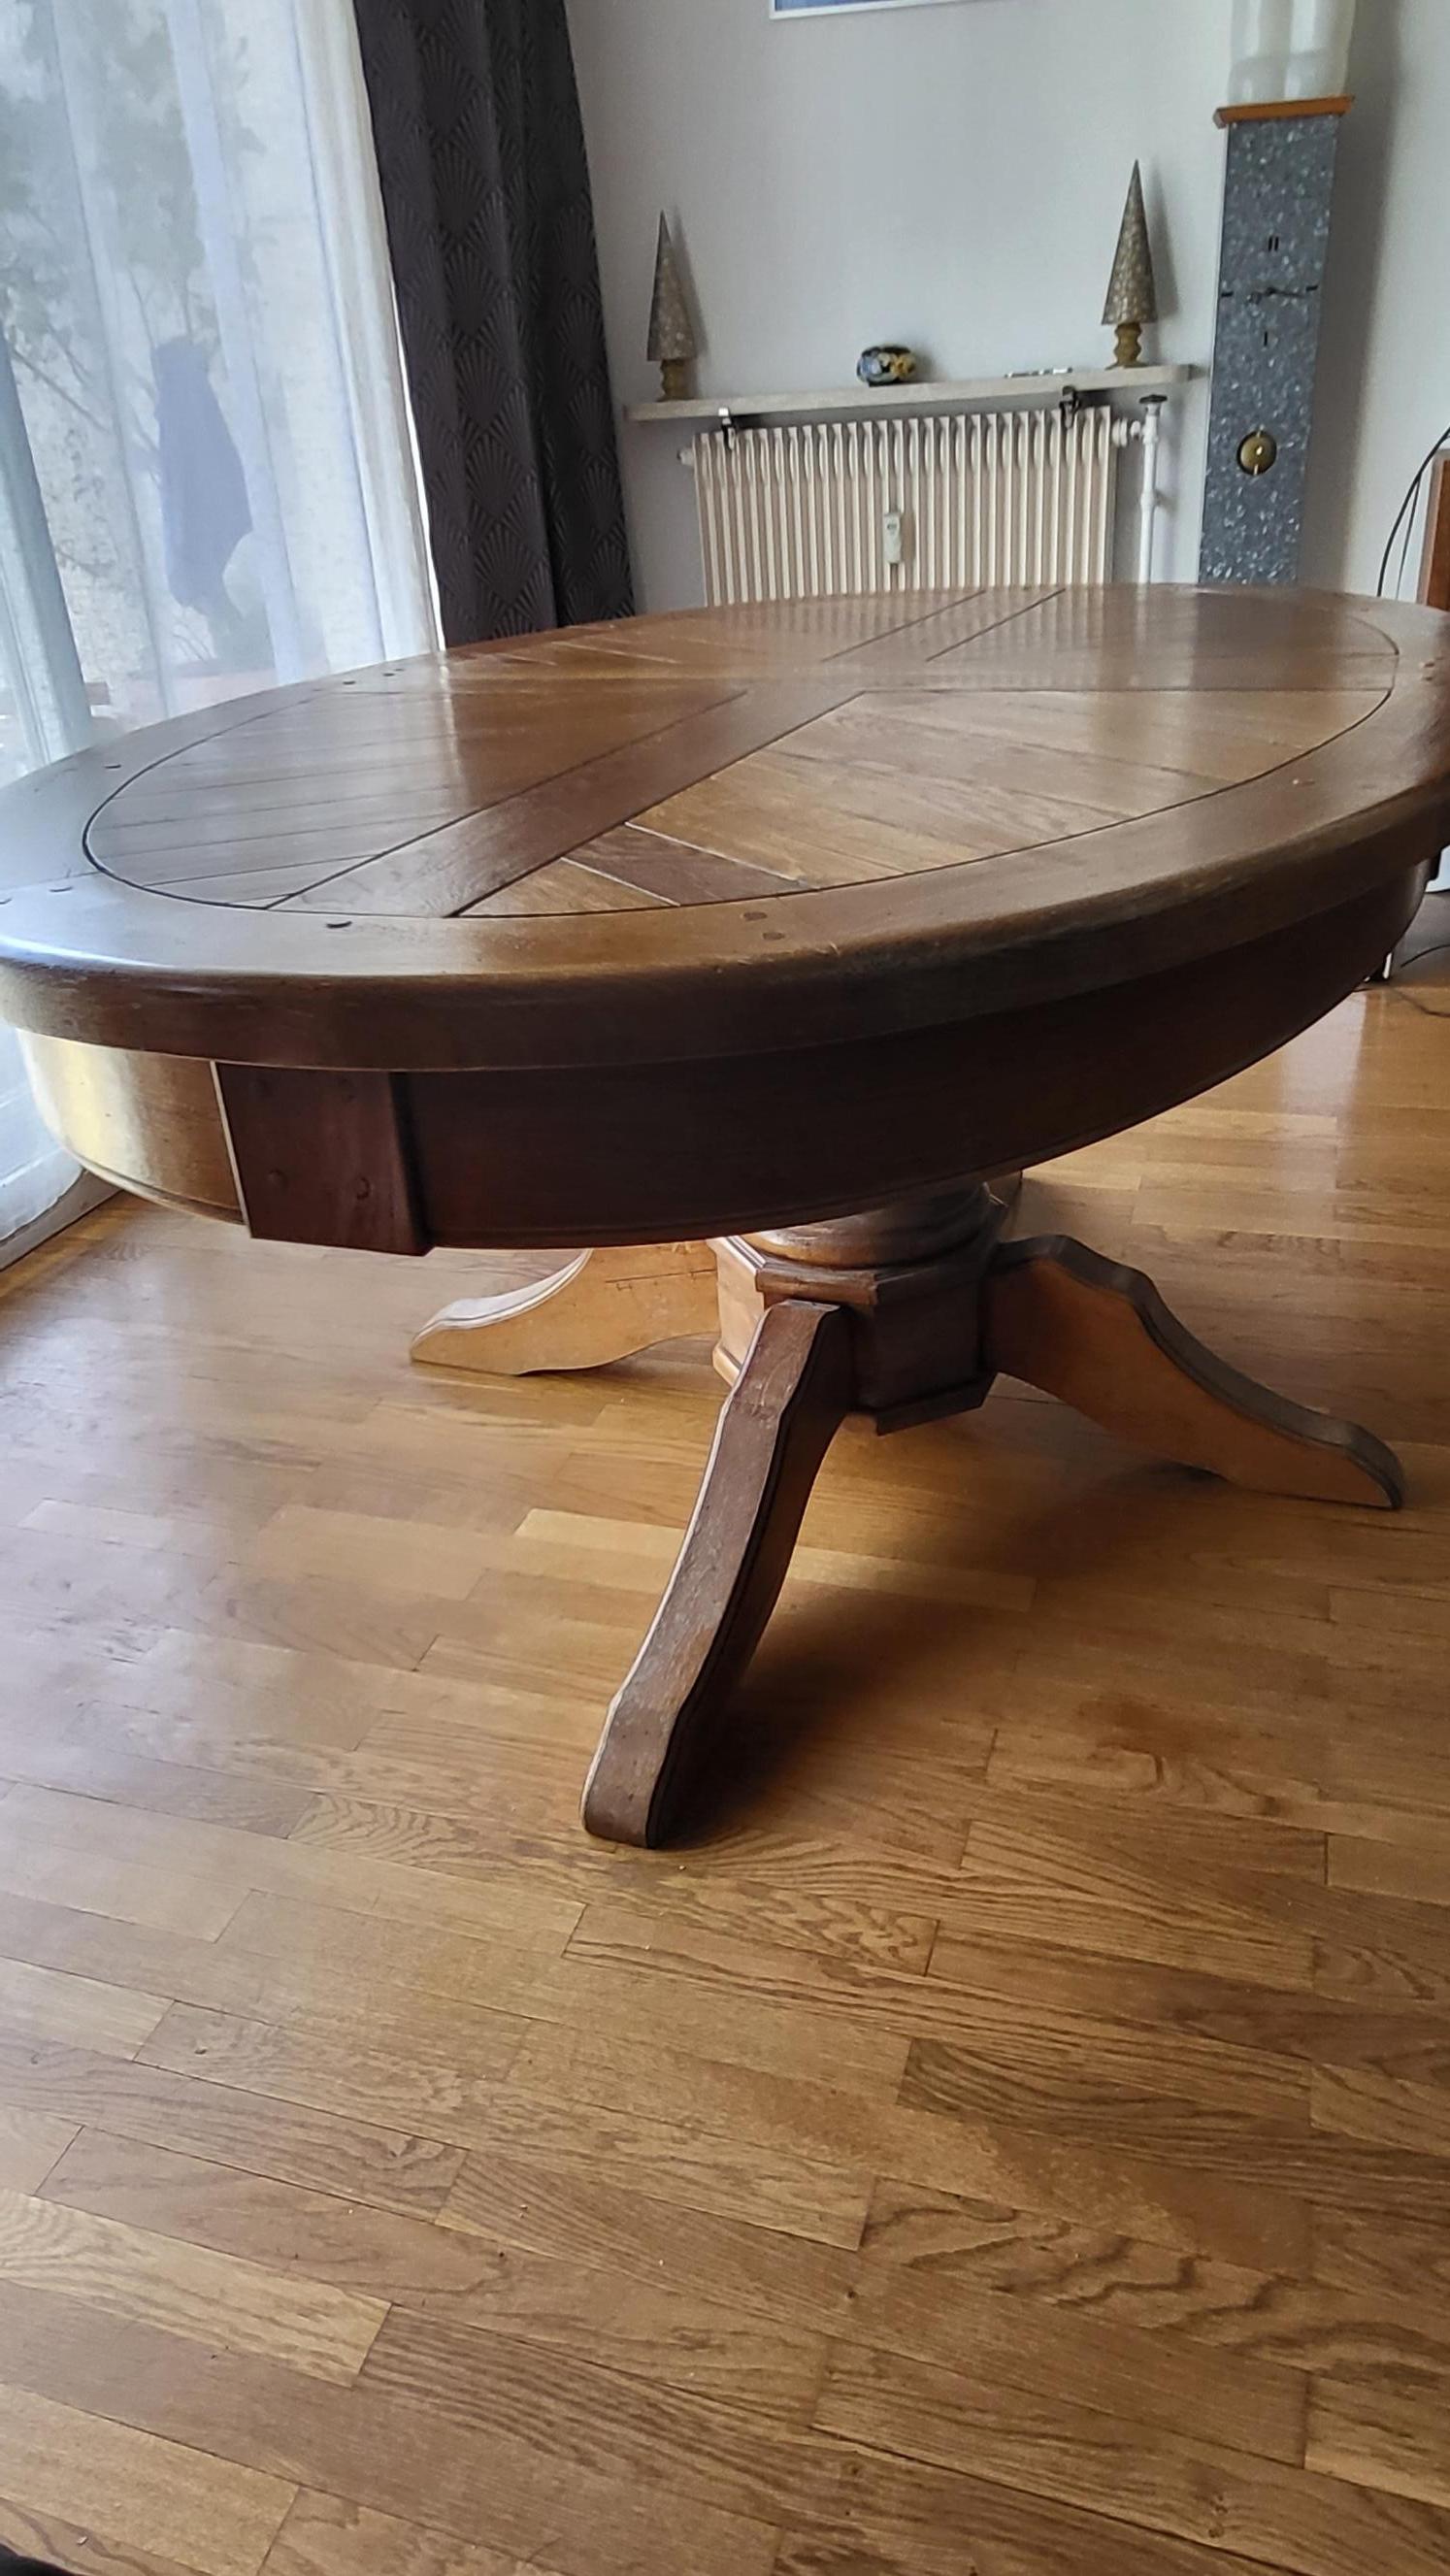 French Provincial Table ovale française, en chêne massif grand taille avec pied central  1950 For Sale